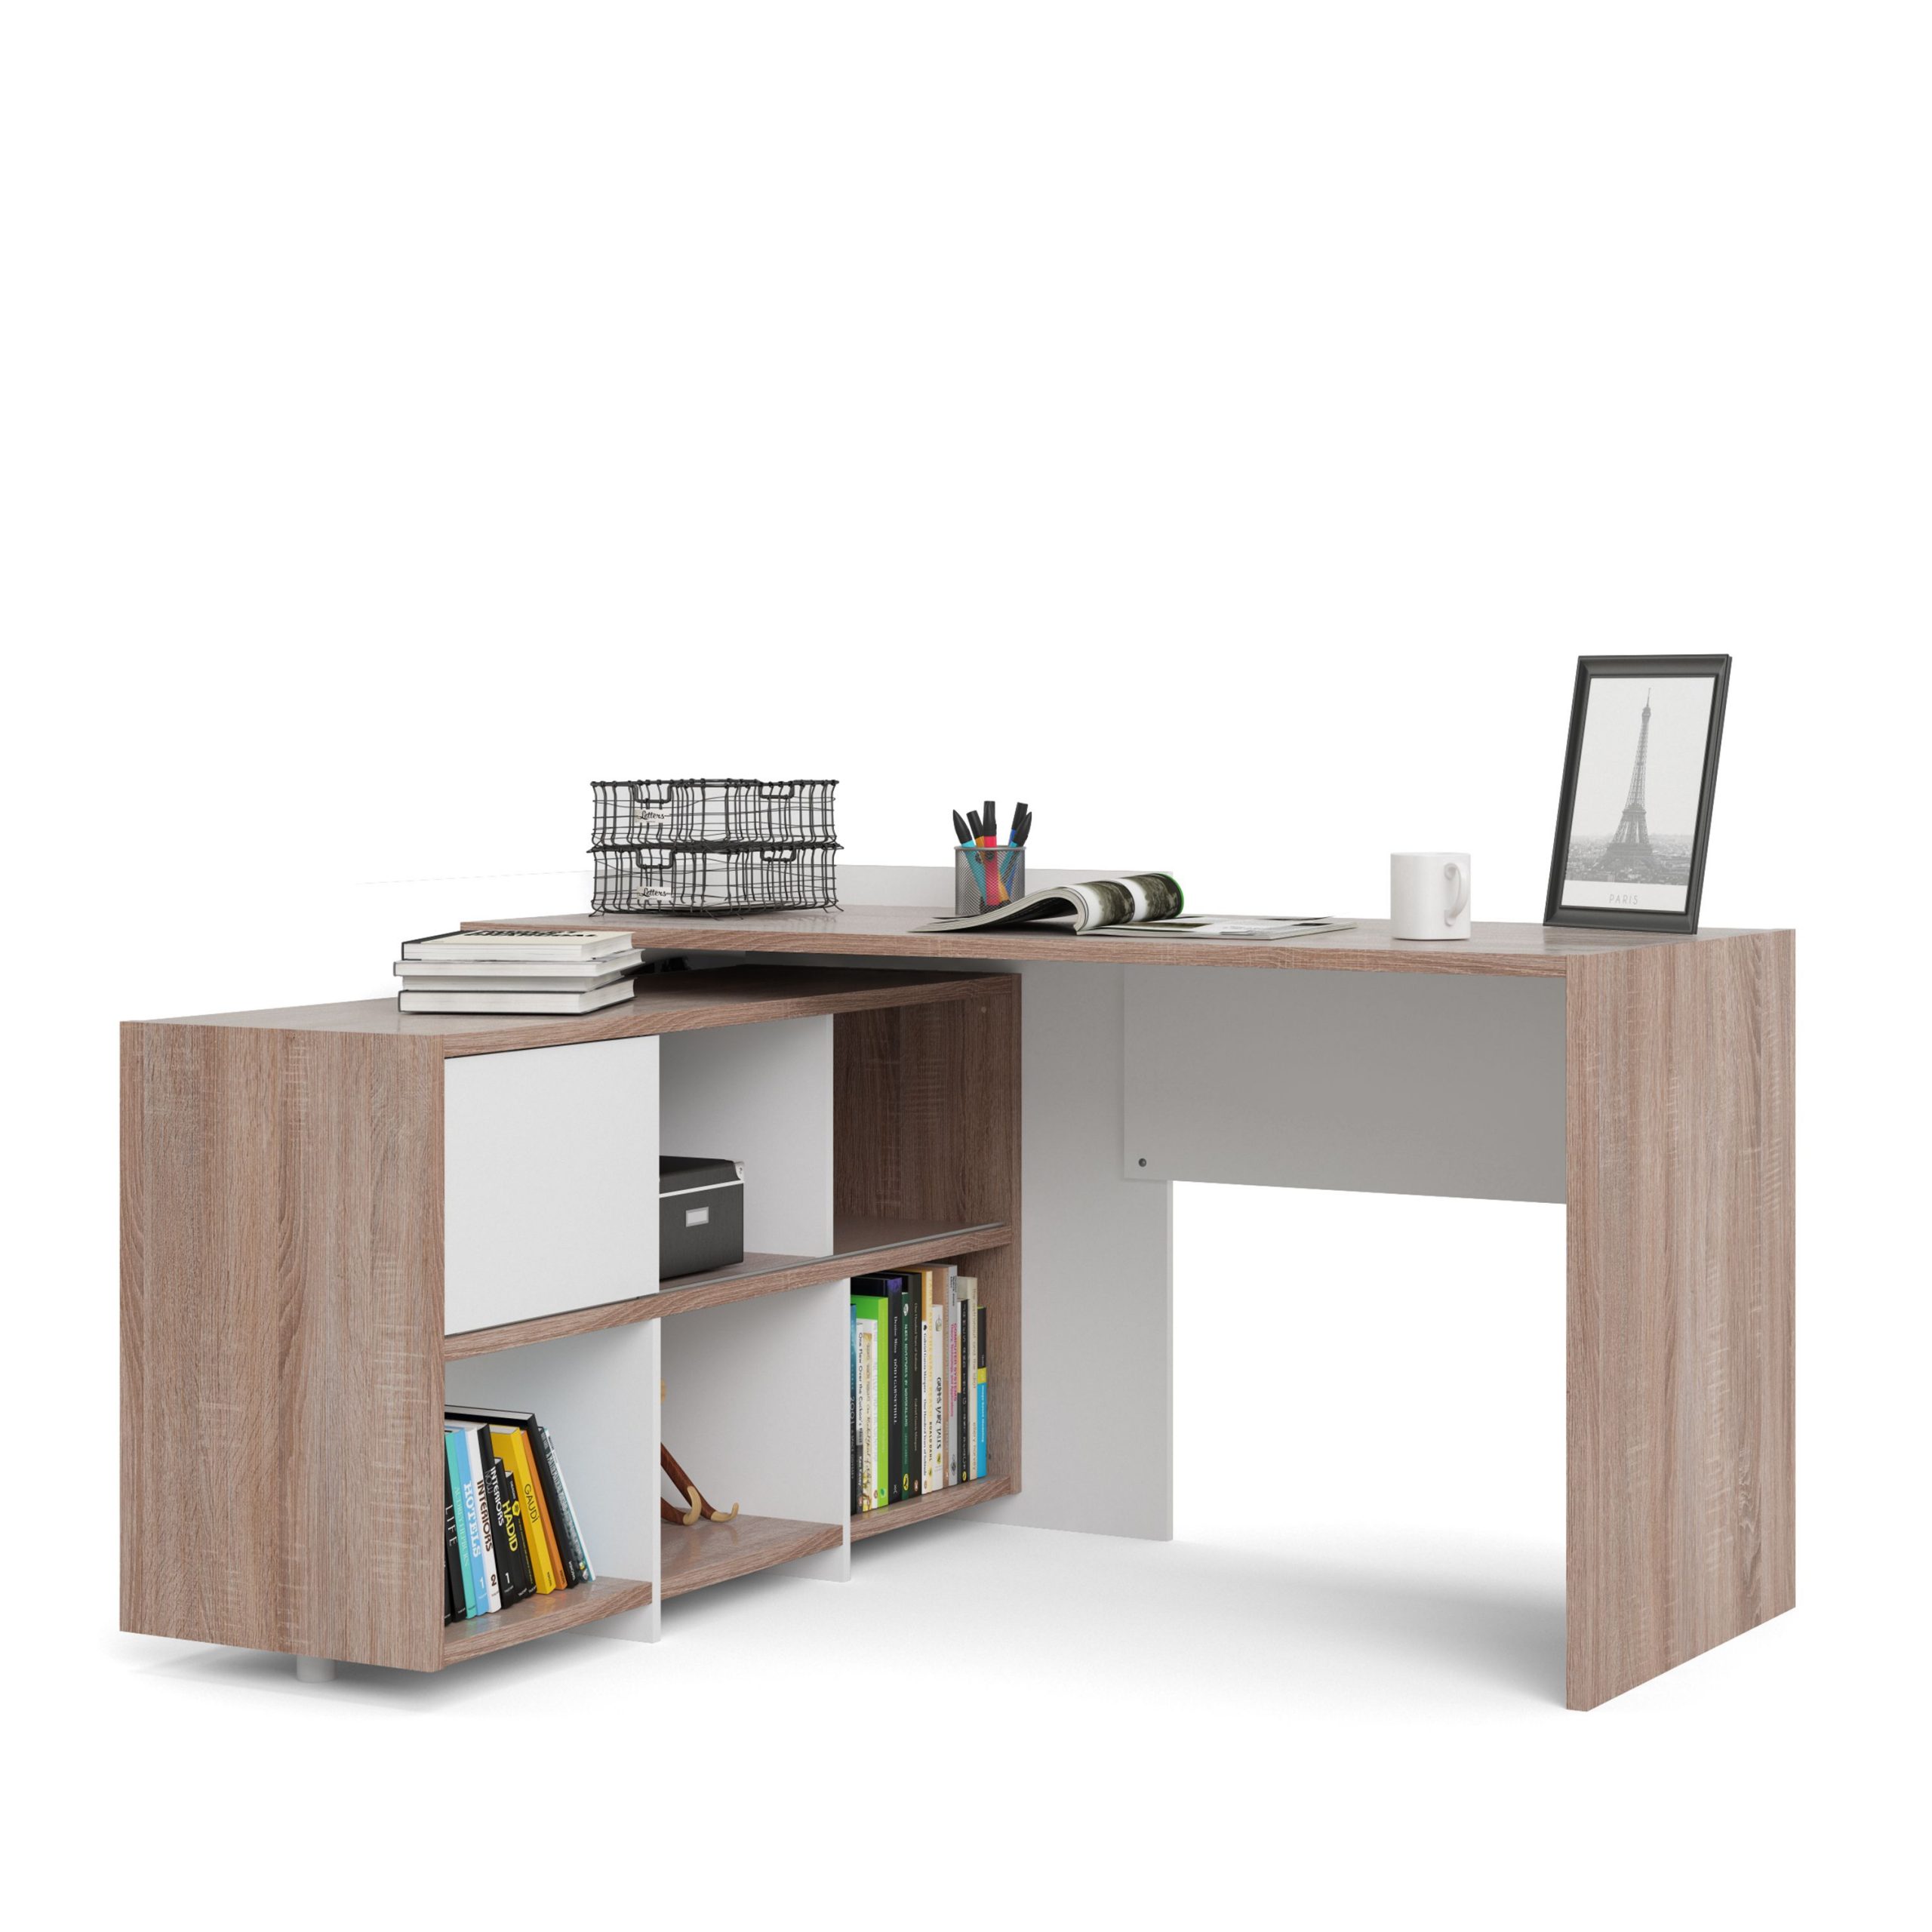 Function Plus Unit Desk With 6 Shelf Bookcase In White And Truffle Oak